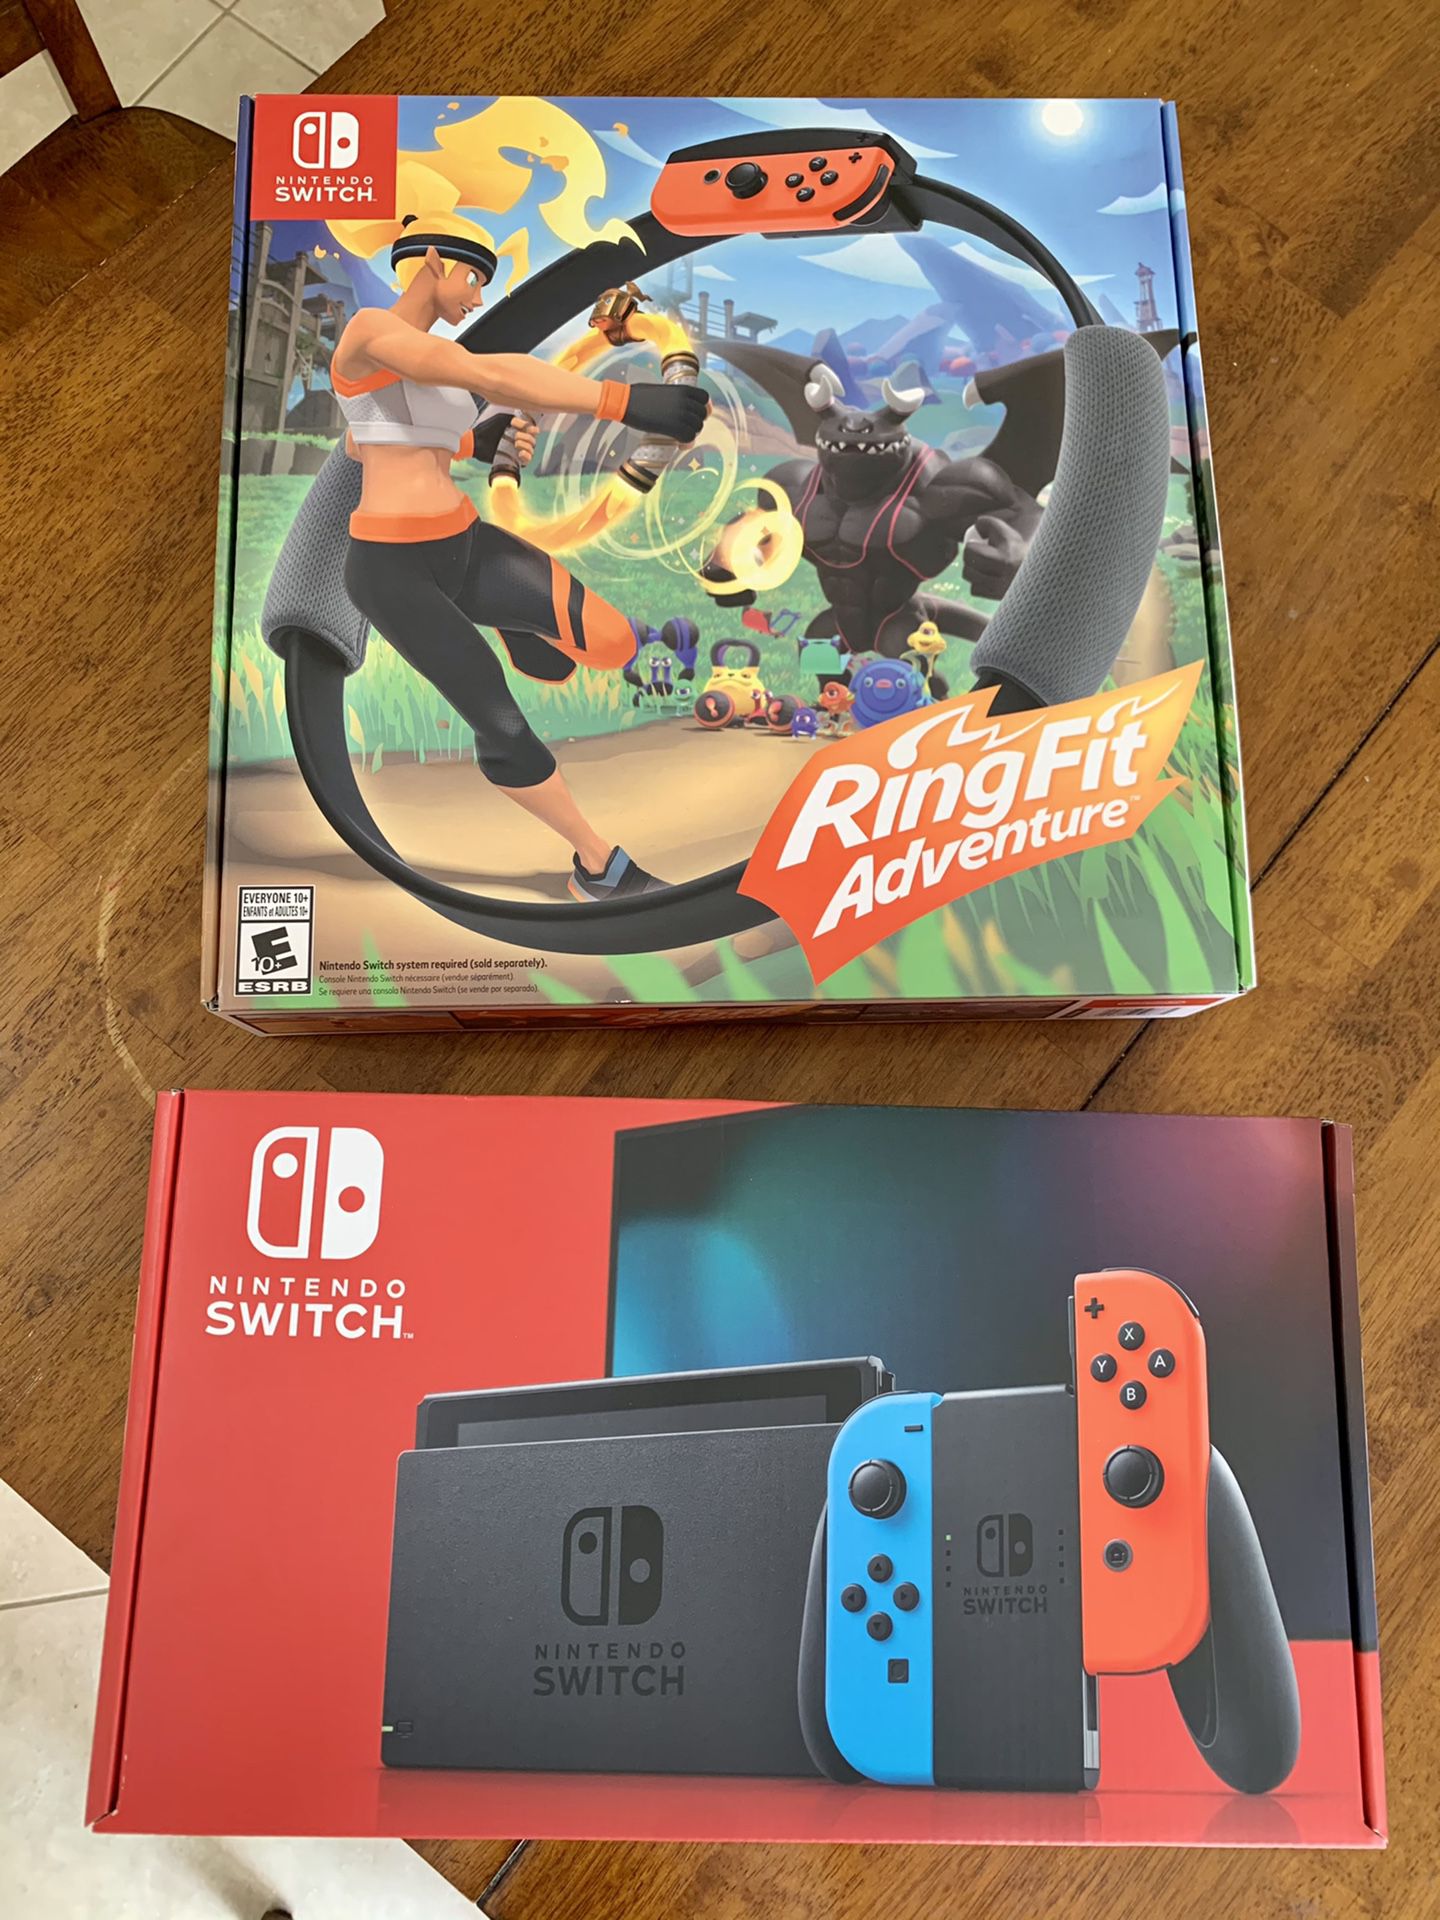 Nintendo Switch and Ring Fit Adventure